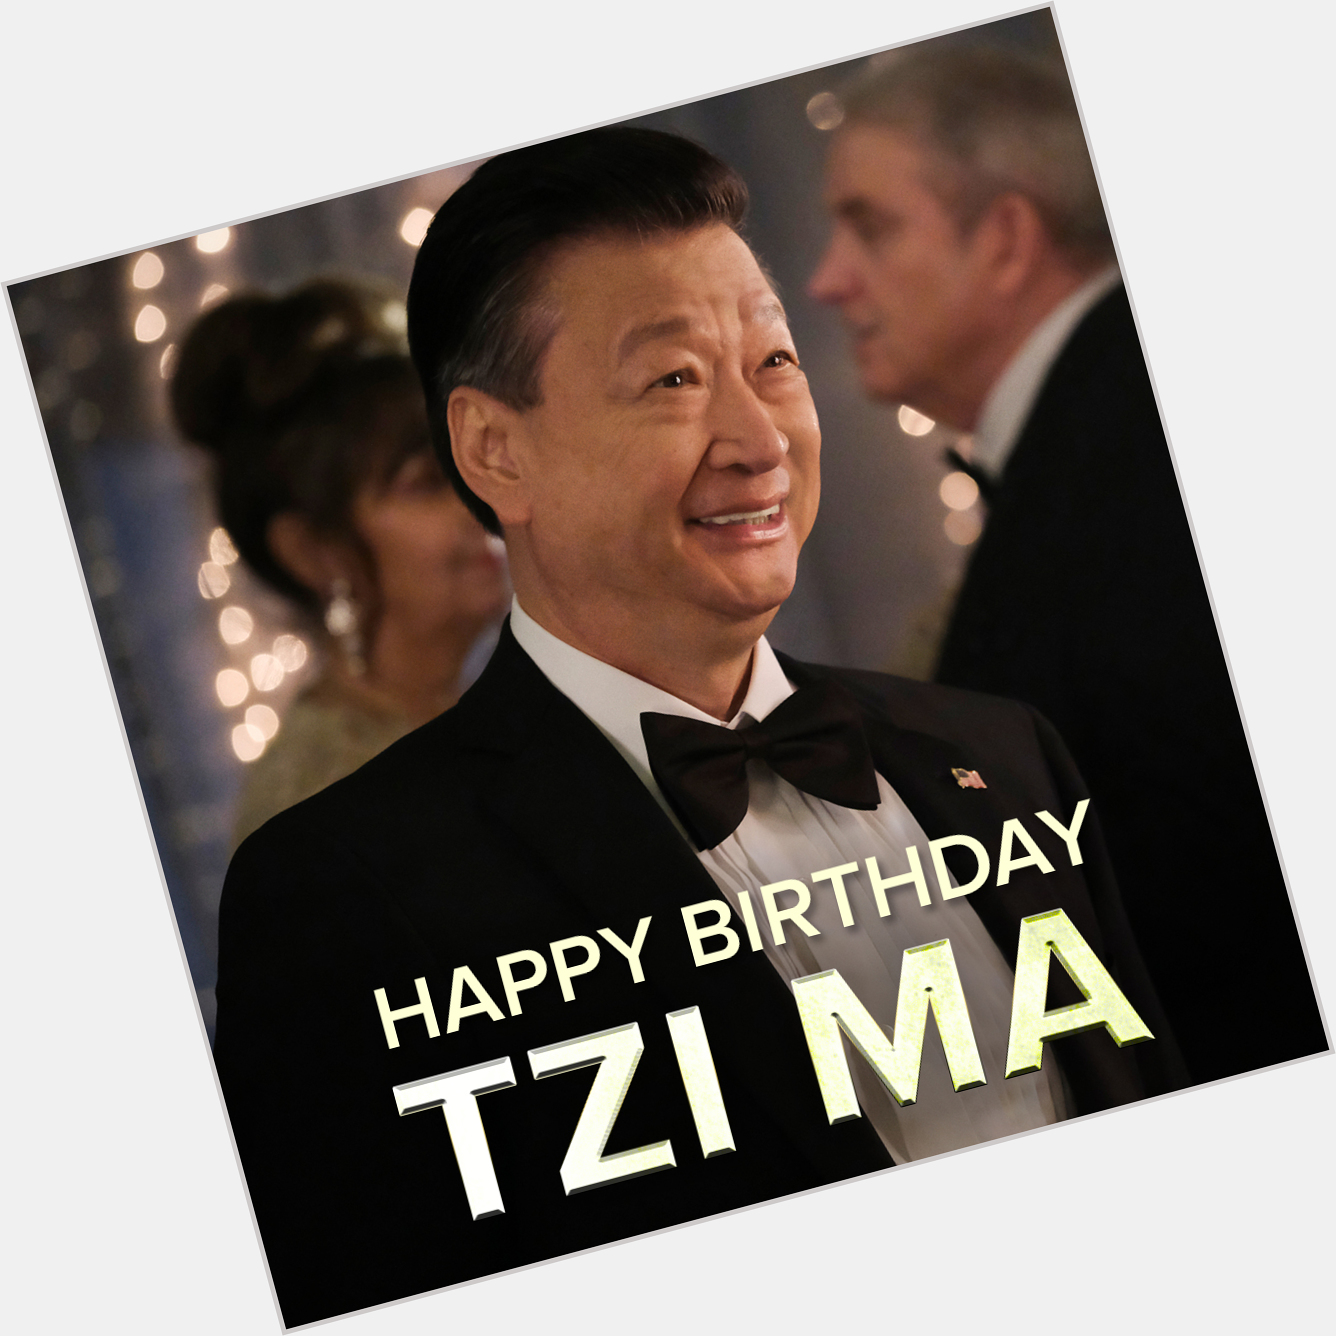 To the best Baba out there! Happy birthday, Tzi Ma! 